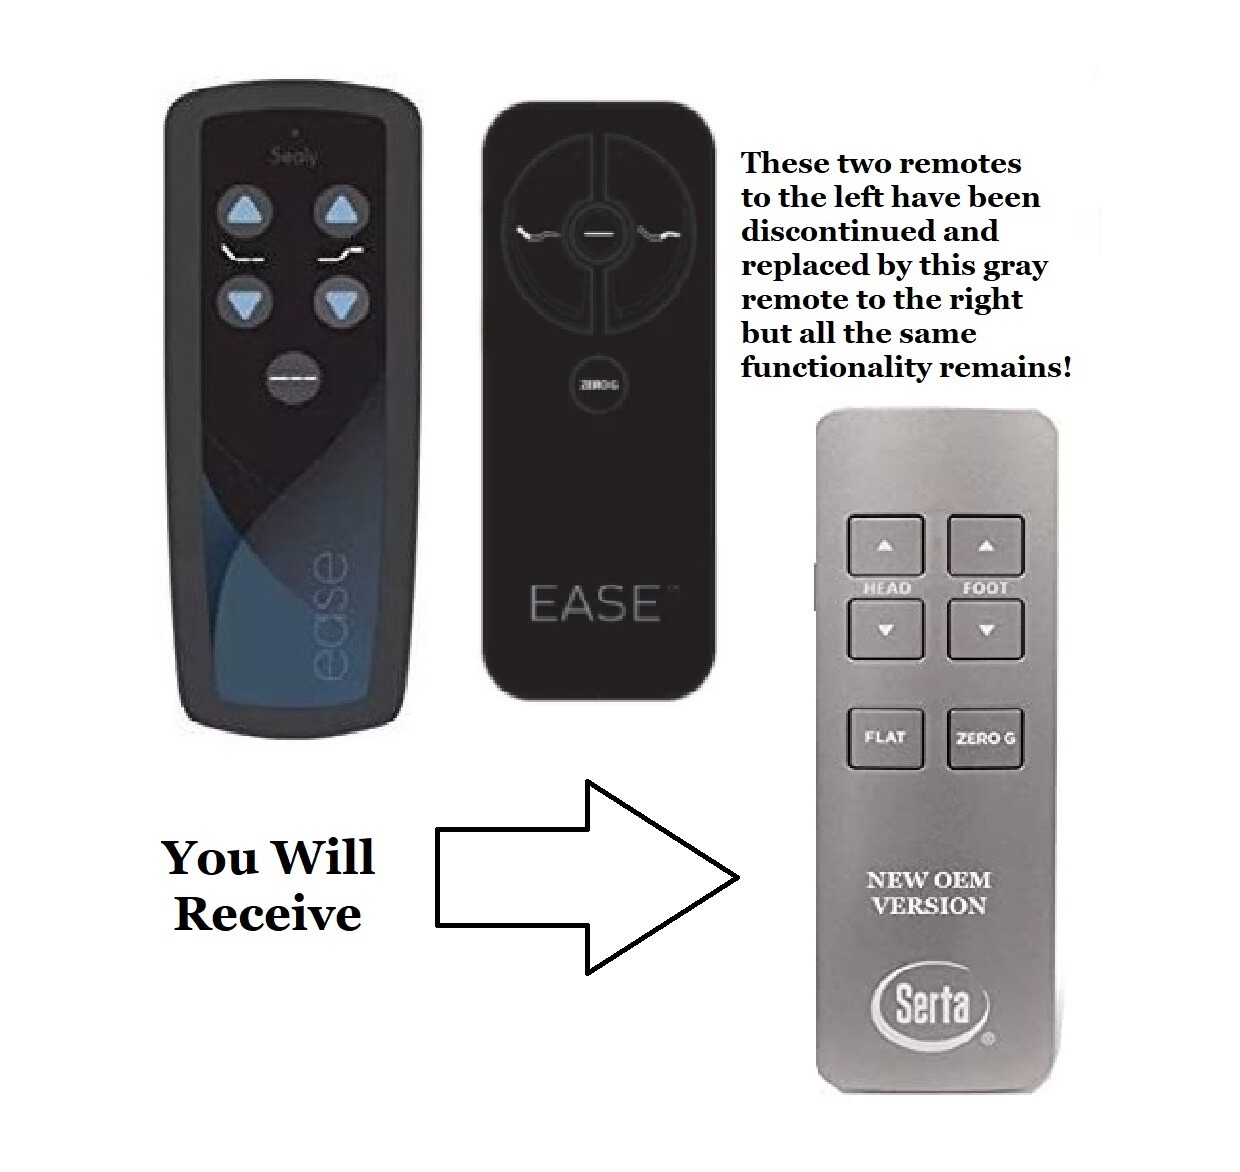 Sealy Ease 1.0/2.0/3.0 6 Button Serta Replacement Remote